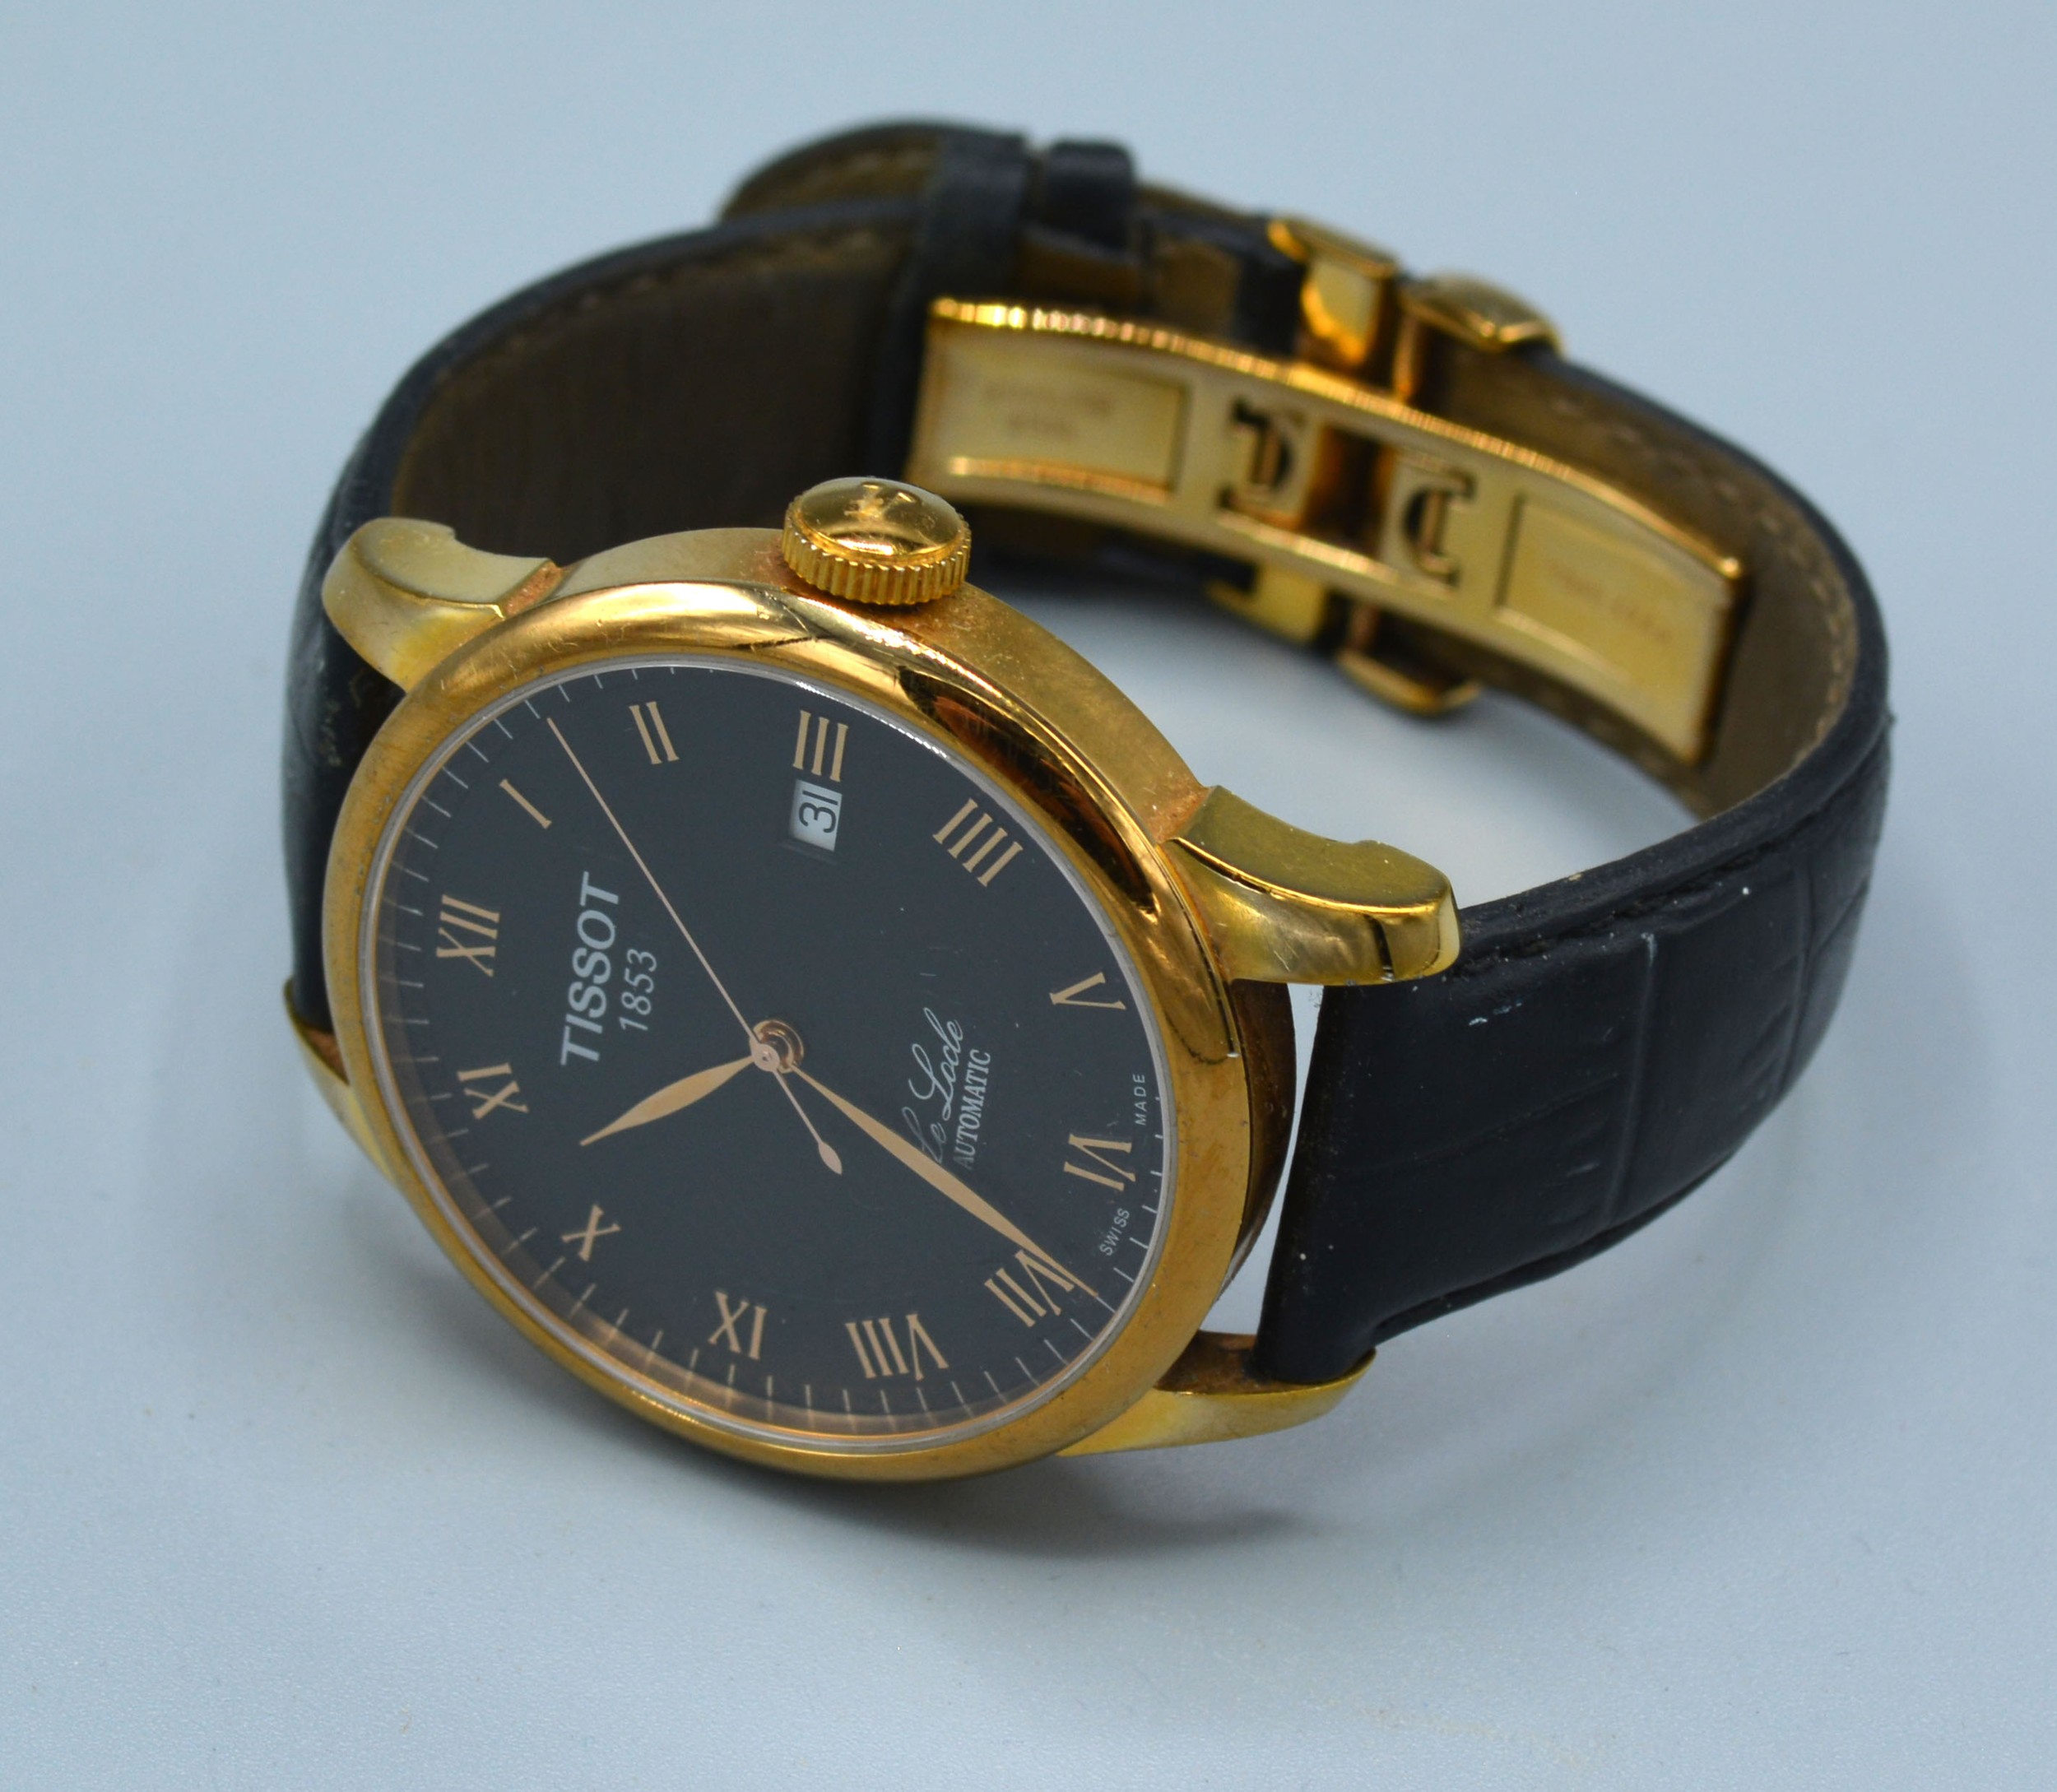 A Tissot Le Locle Automatic Gentleman's Wrist Watch - Image 2 of 2